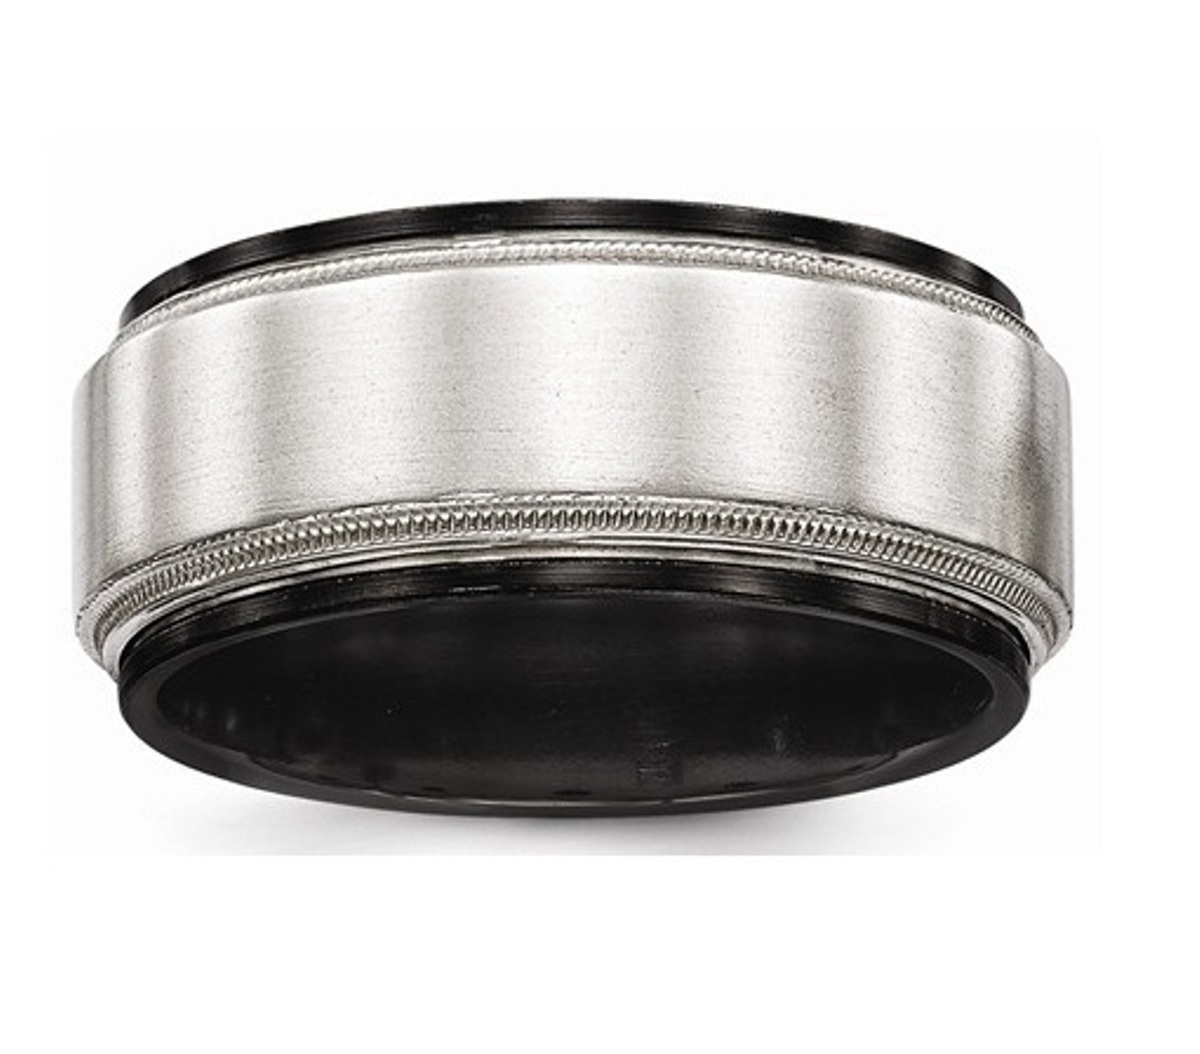  Black Ti And Sterling Silver Brushed And Polished Milgrain Ring